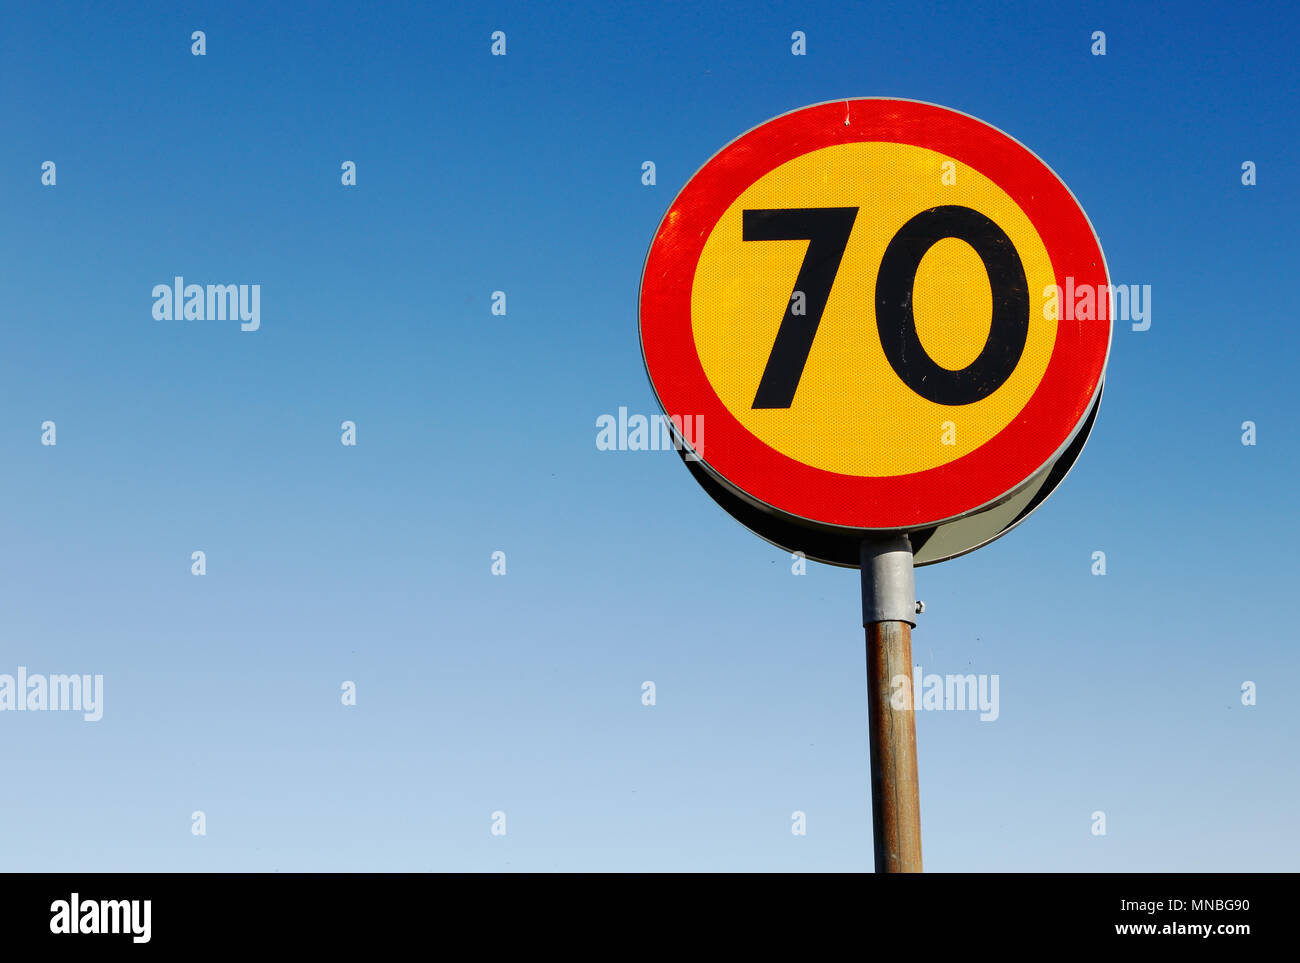 One speed linit sign 70 kmh against a blue sky. Stock Photo